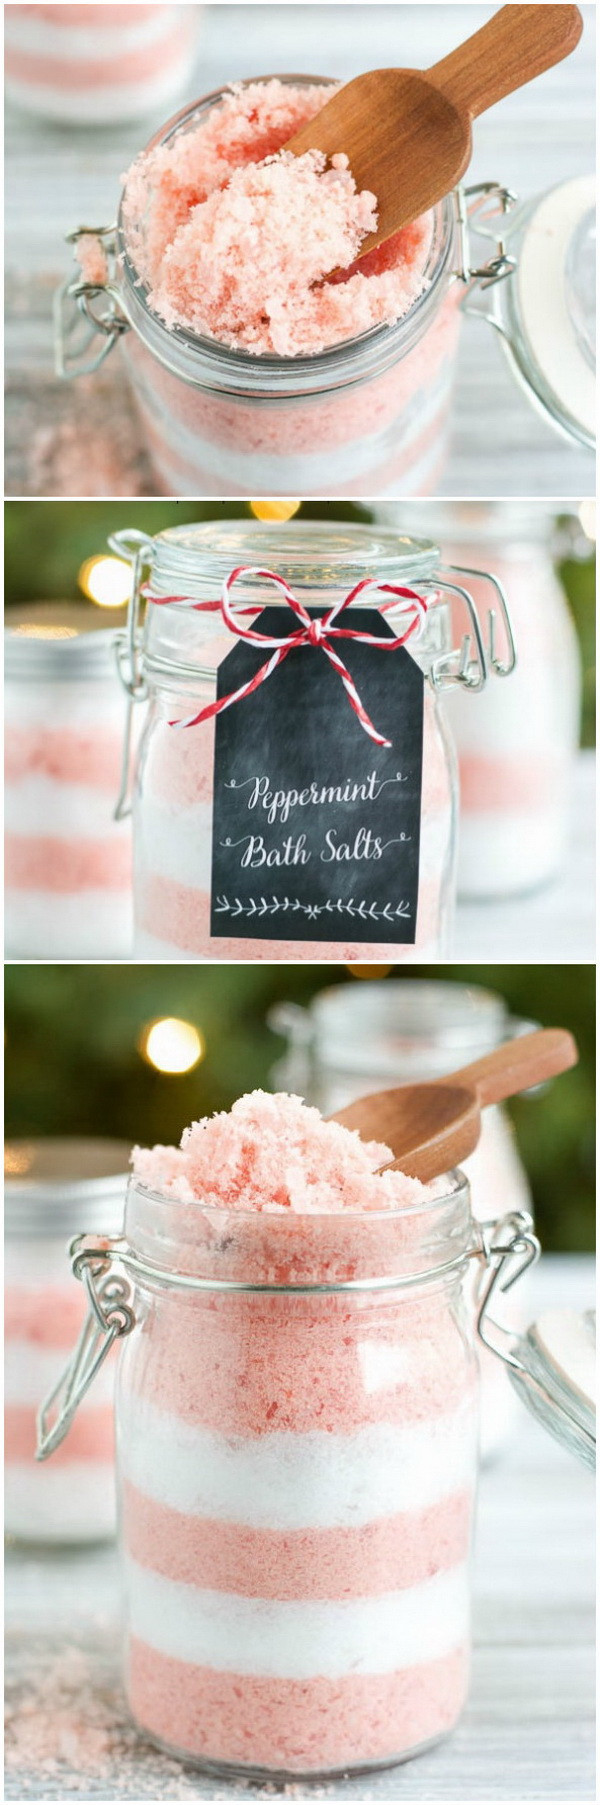 DIY Gifts Ideas For Christmas
 30 Homemade Christmas Gifts Everyone will Love For